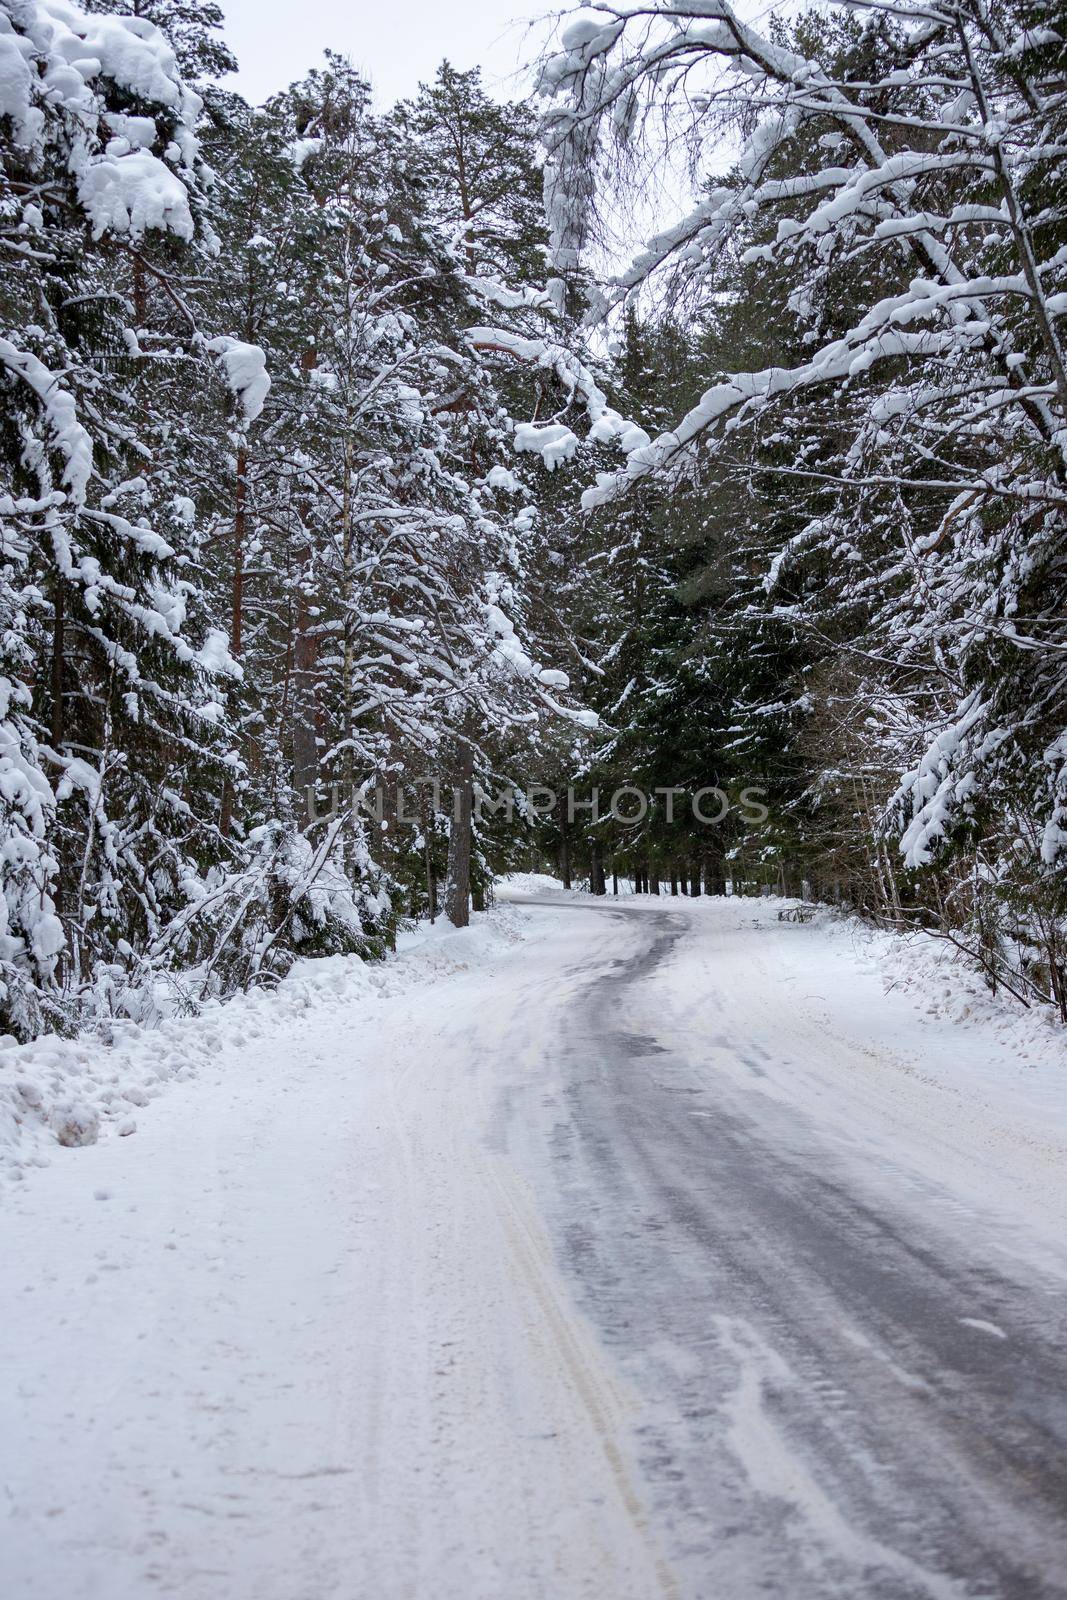 Scenic winter road through forest covered in snow after snowfall by bySergPo